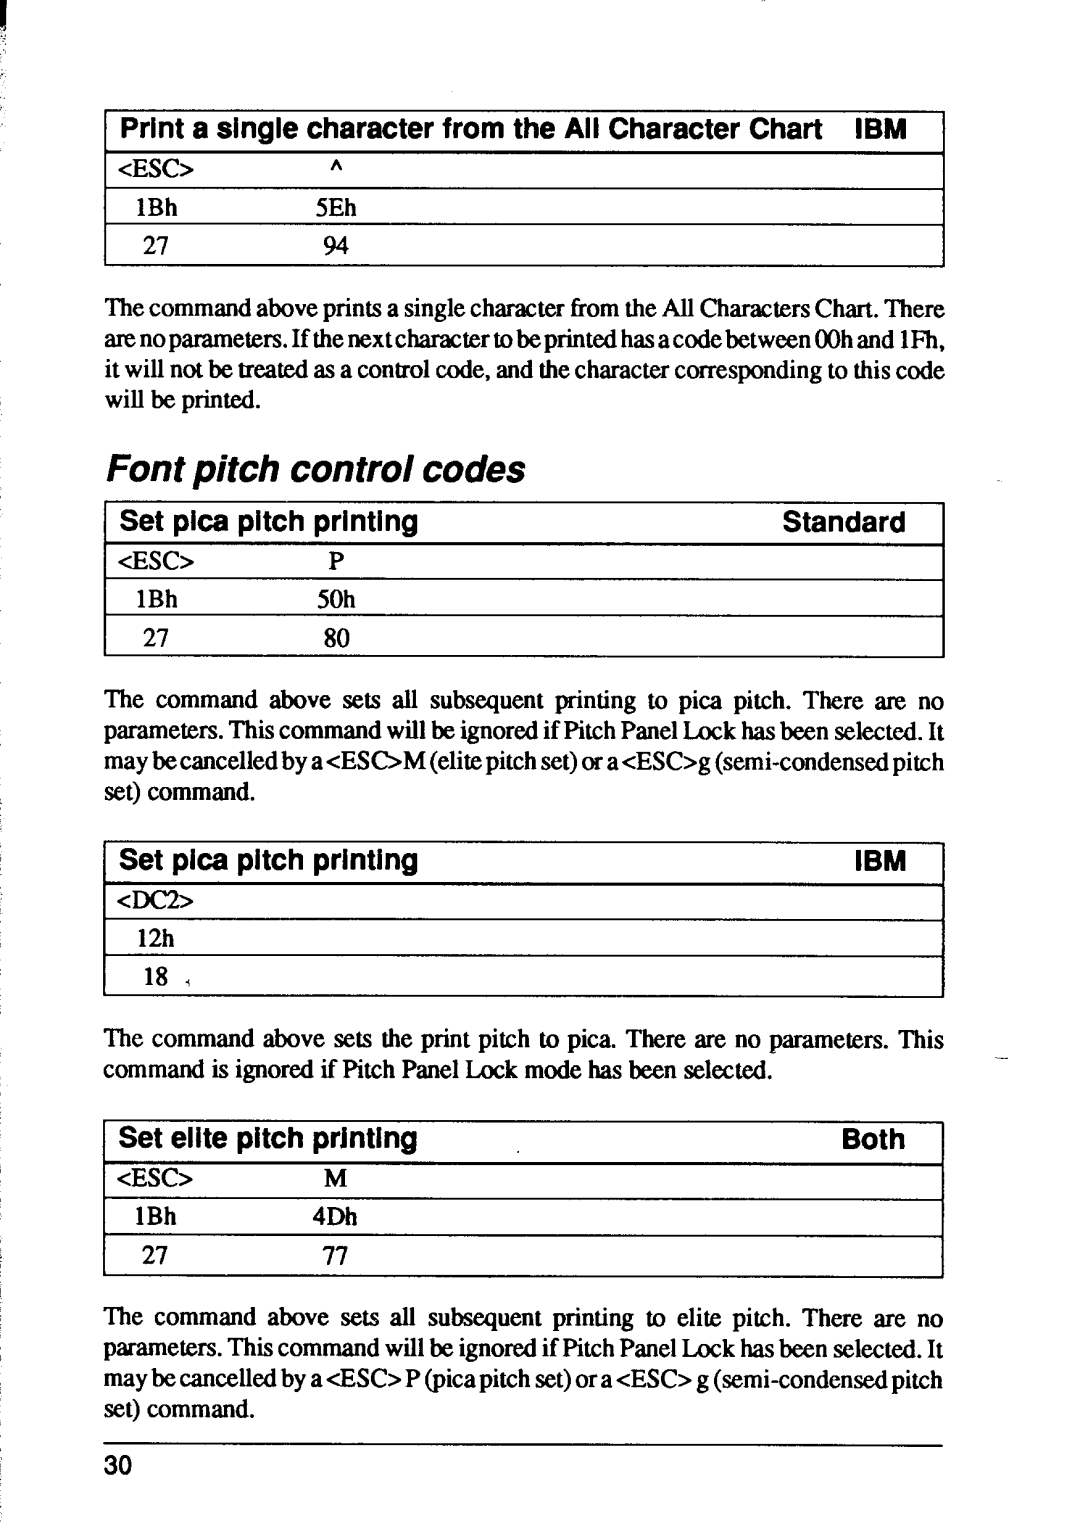 Star Micronics XB24-10 Font pitch control codes, Print a single character from the All Character Chart IBM, Standard, Both 